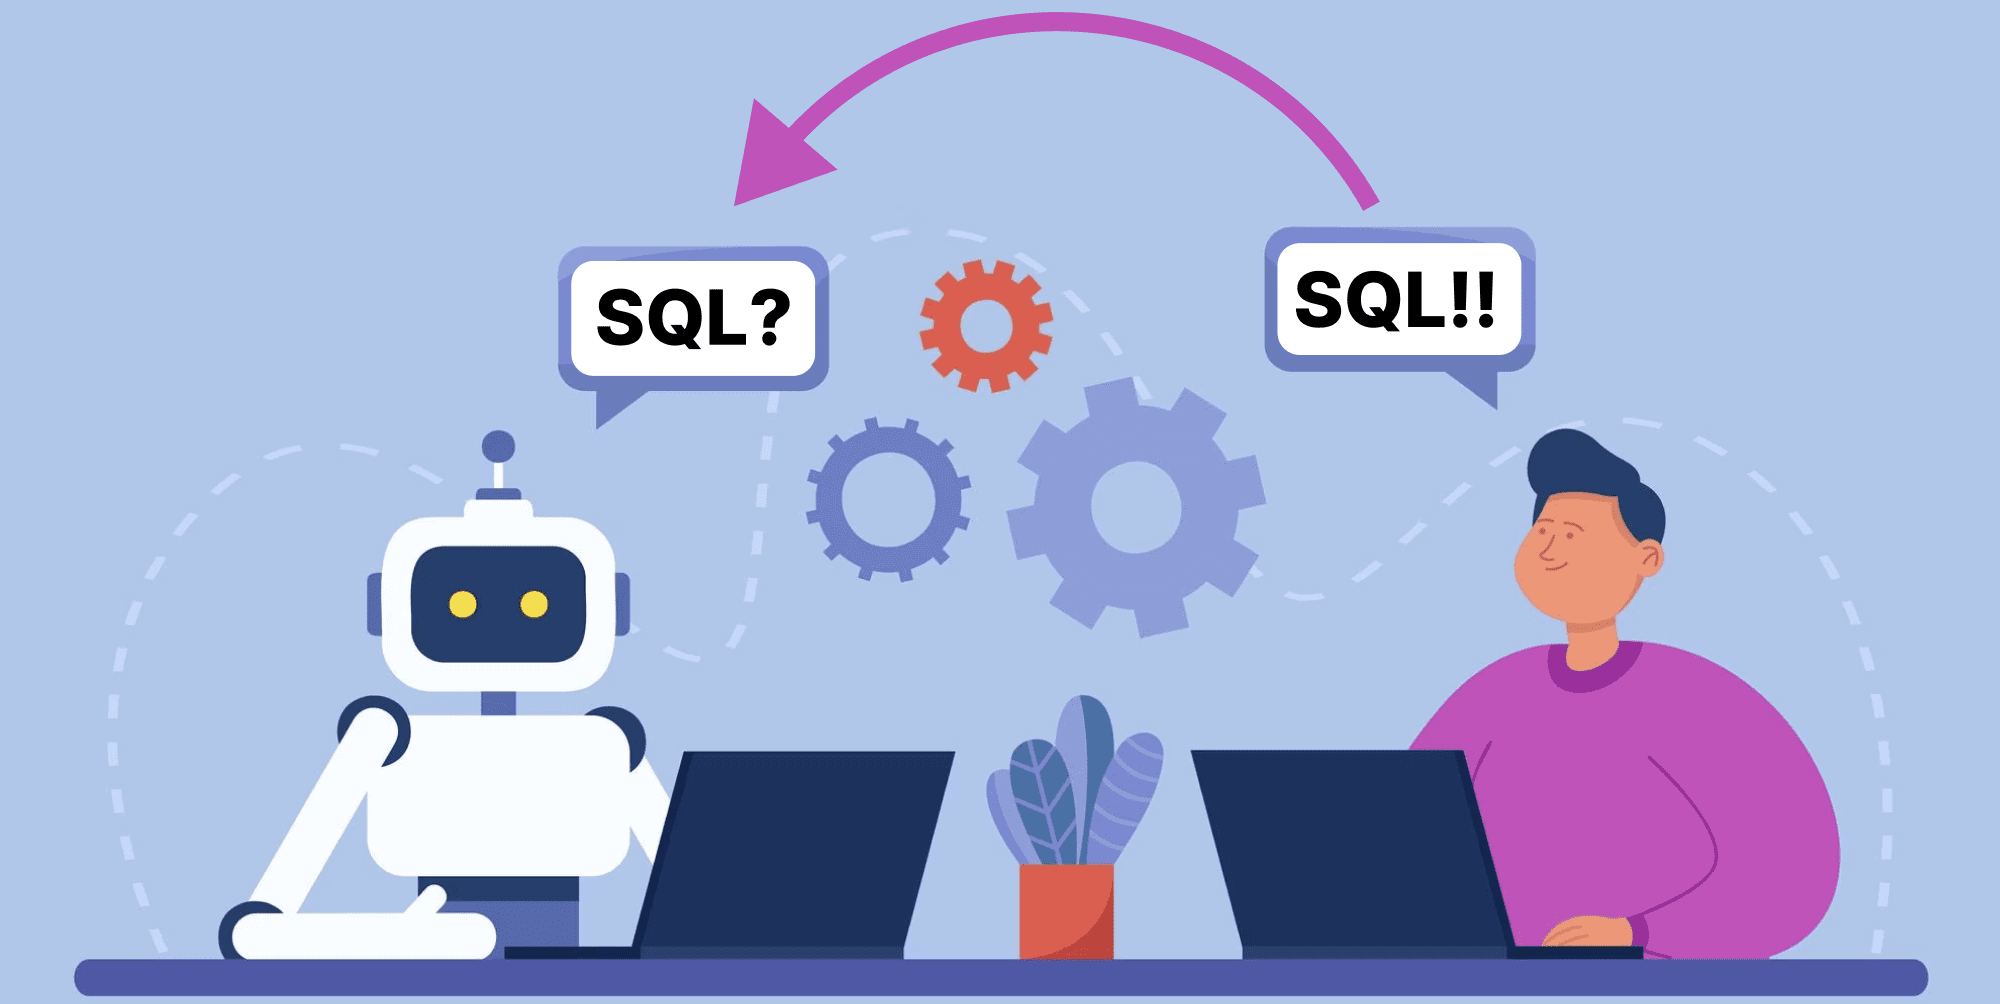 Leveraging GPT Models to Transform Natural Language to SQL Queries